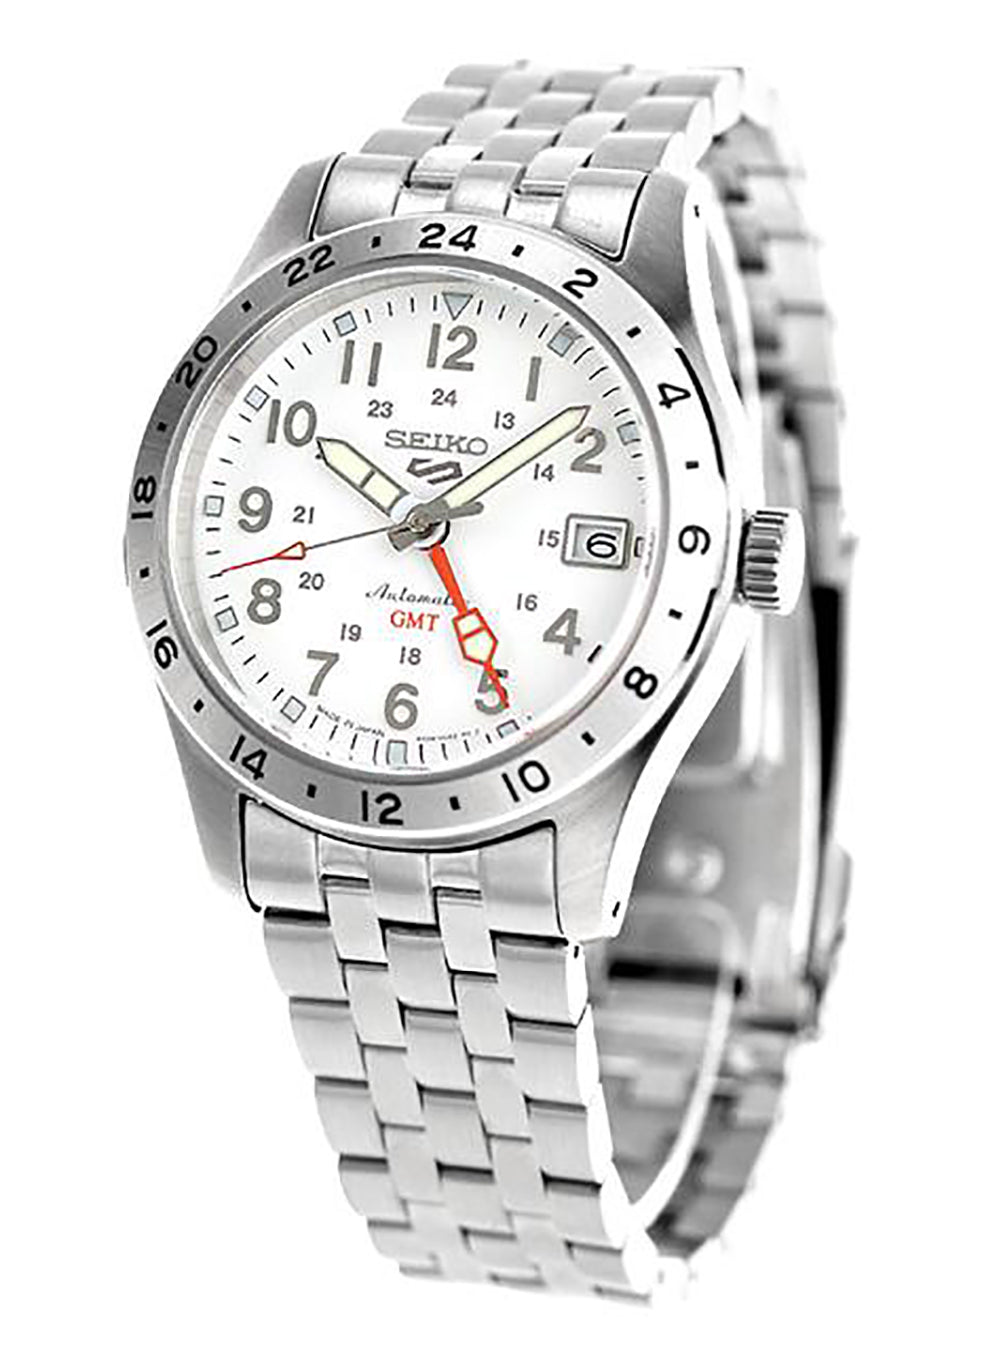 SEIKO 5 SPORTS FIELD SPORTS STYLE GMT MADE IN JAPAN JDM – japan-select